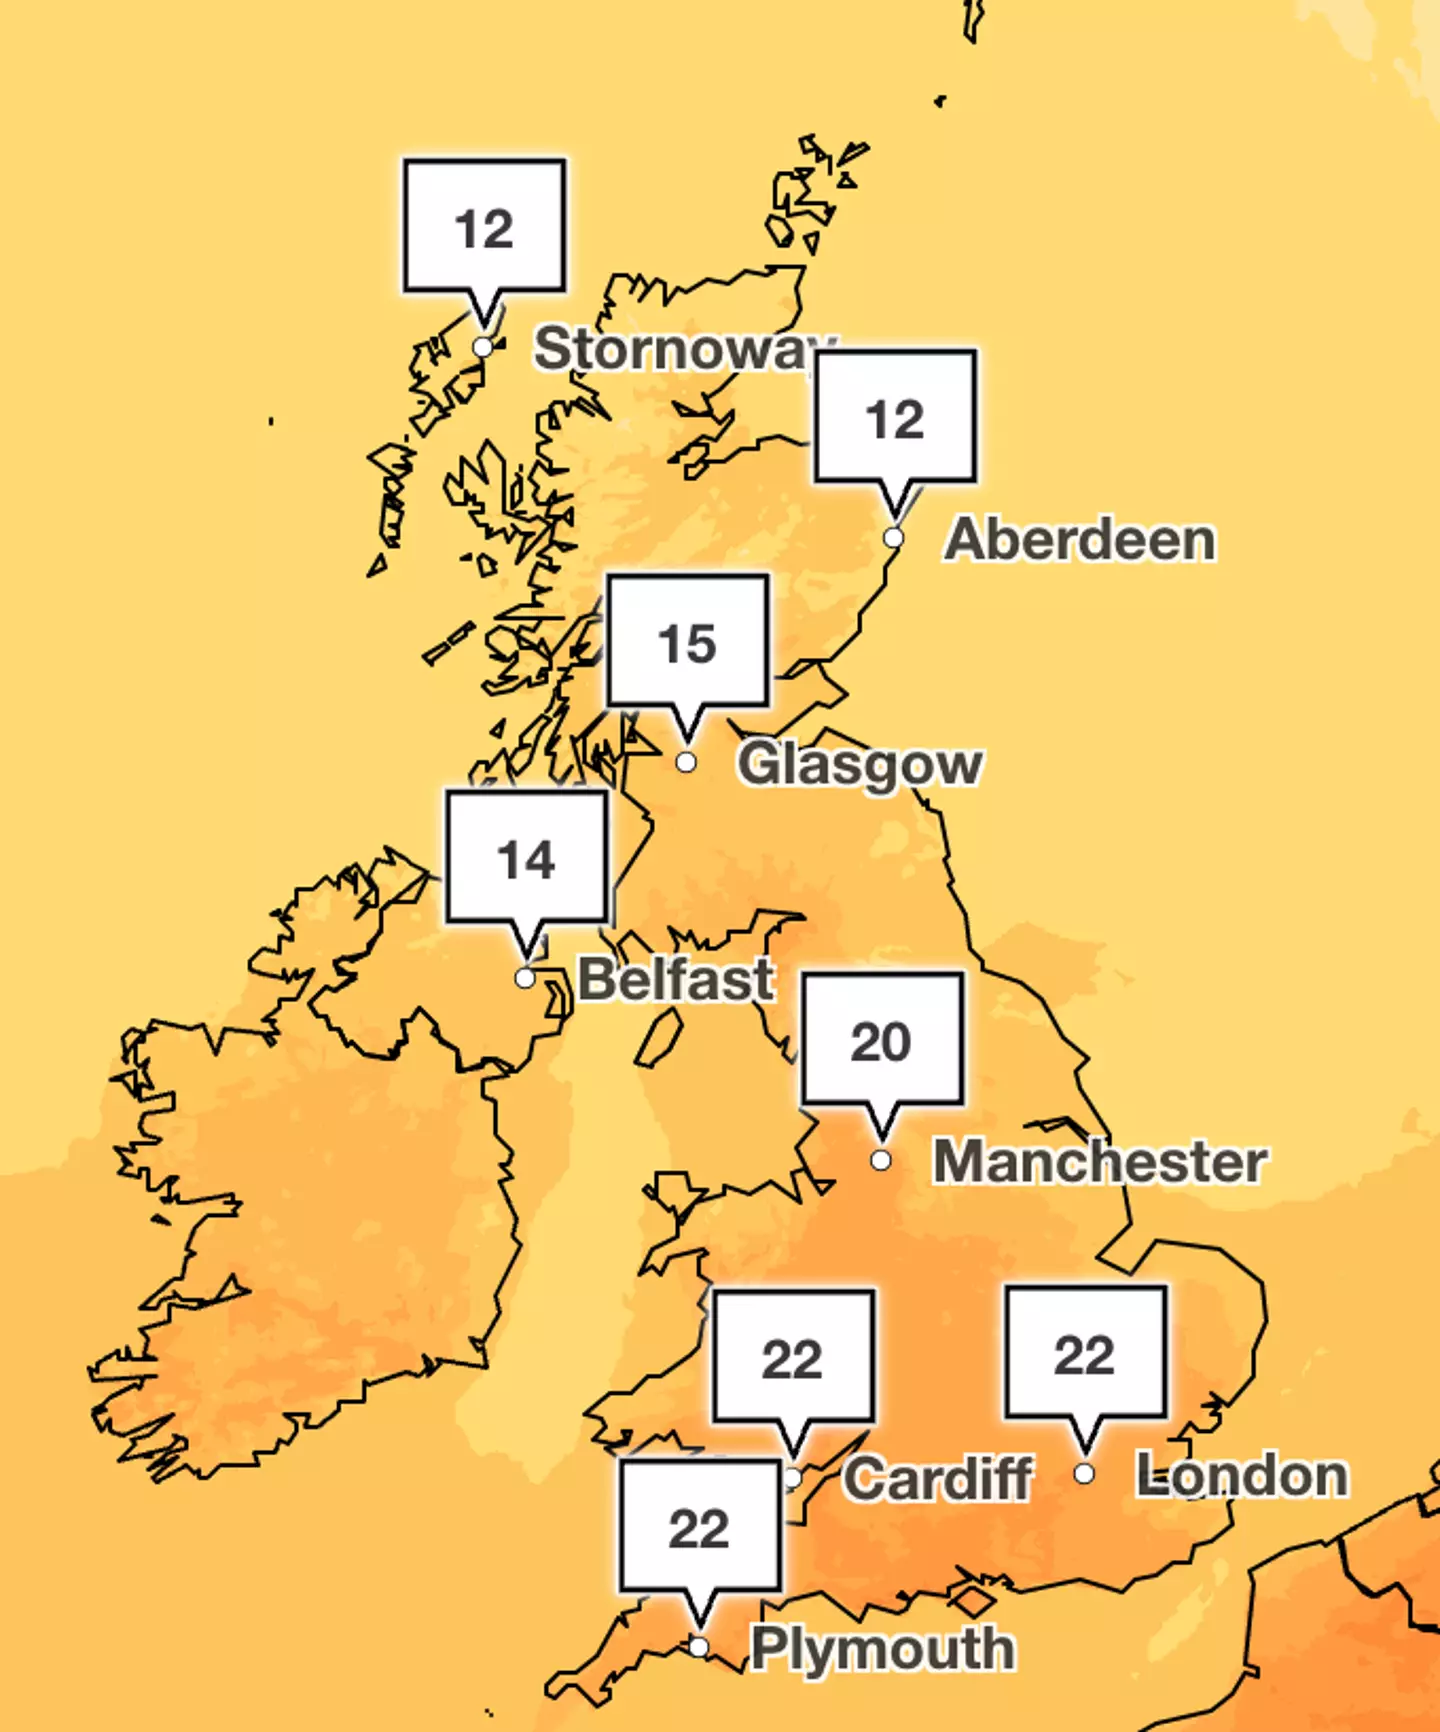 The sun will be shining for most of the UK on Sunday 28 May.